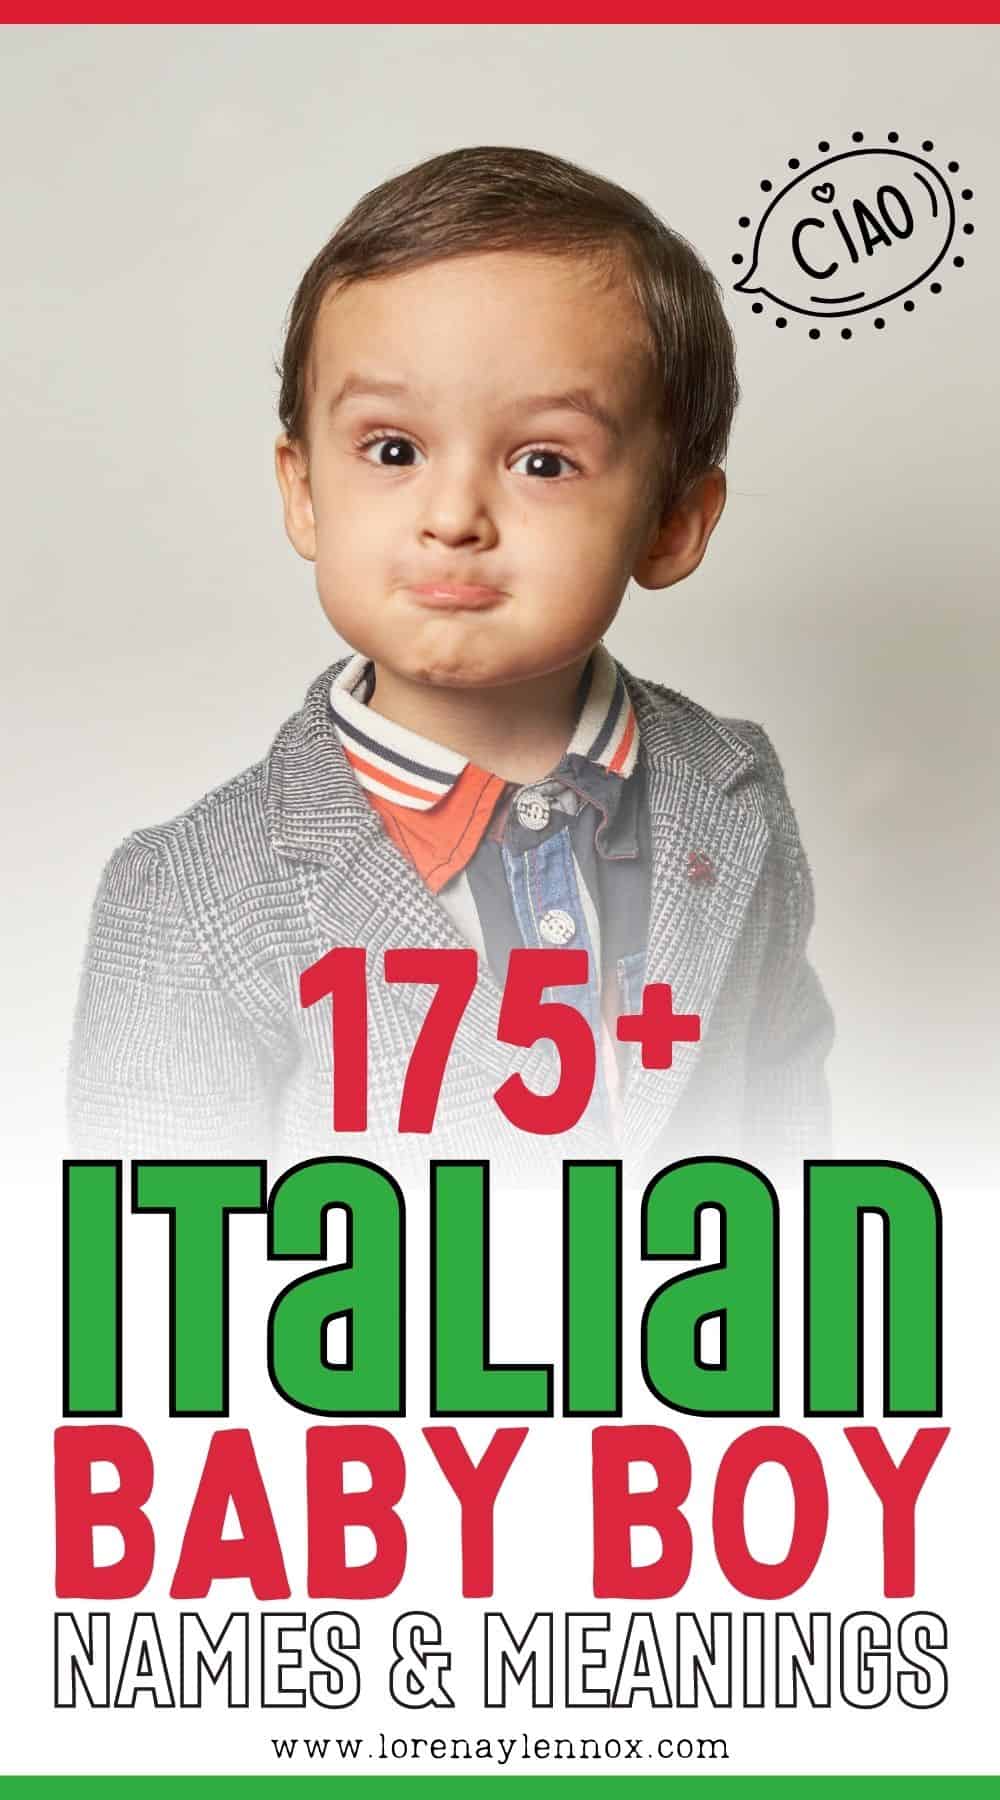 Discover the charm and allure of Italian baby boy names with our curated list of 175 delightful options and their meaningful origins. Embrace the Italian culture and find the perfect name for your little bambino. #ItalianBabyBoyNames #BabyBoyNames #ItalianHeritage